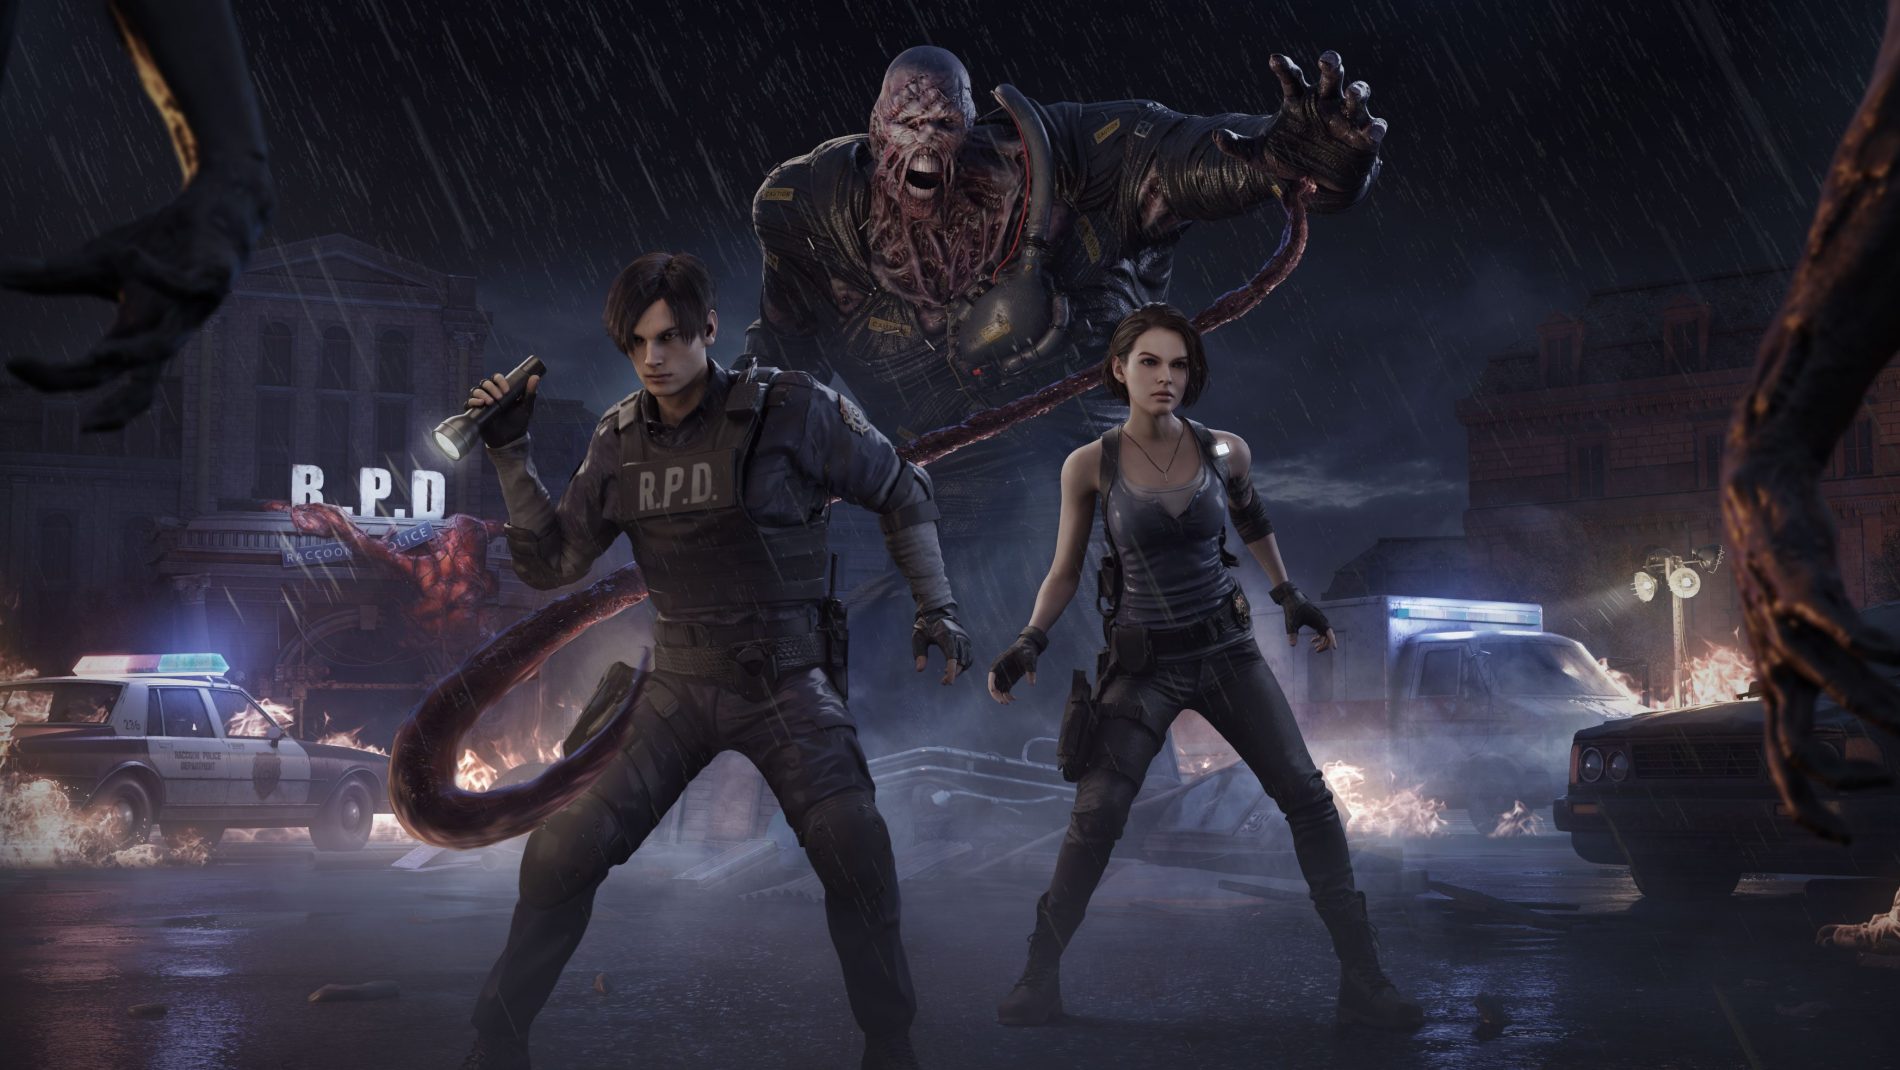 Dead By Daylight Update 5 0 0 Adds Resident Evil Crossover With Nemesis Jill And Leon Playstation Universe